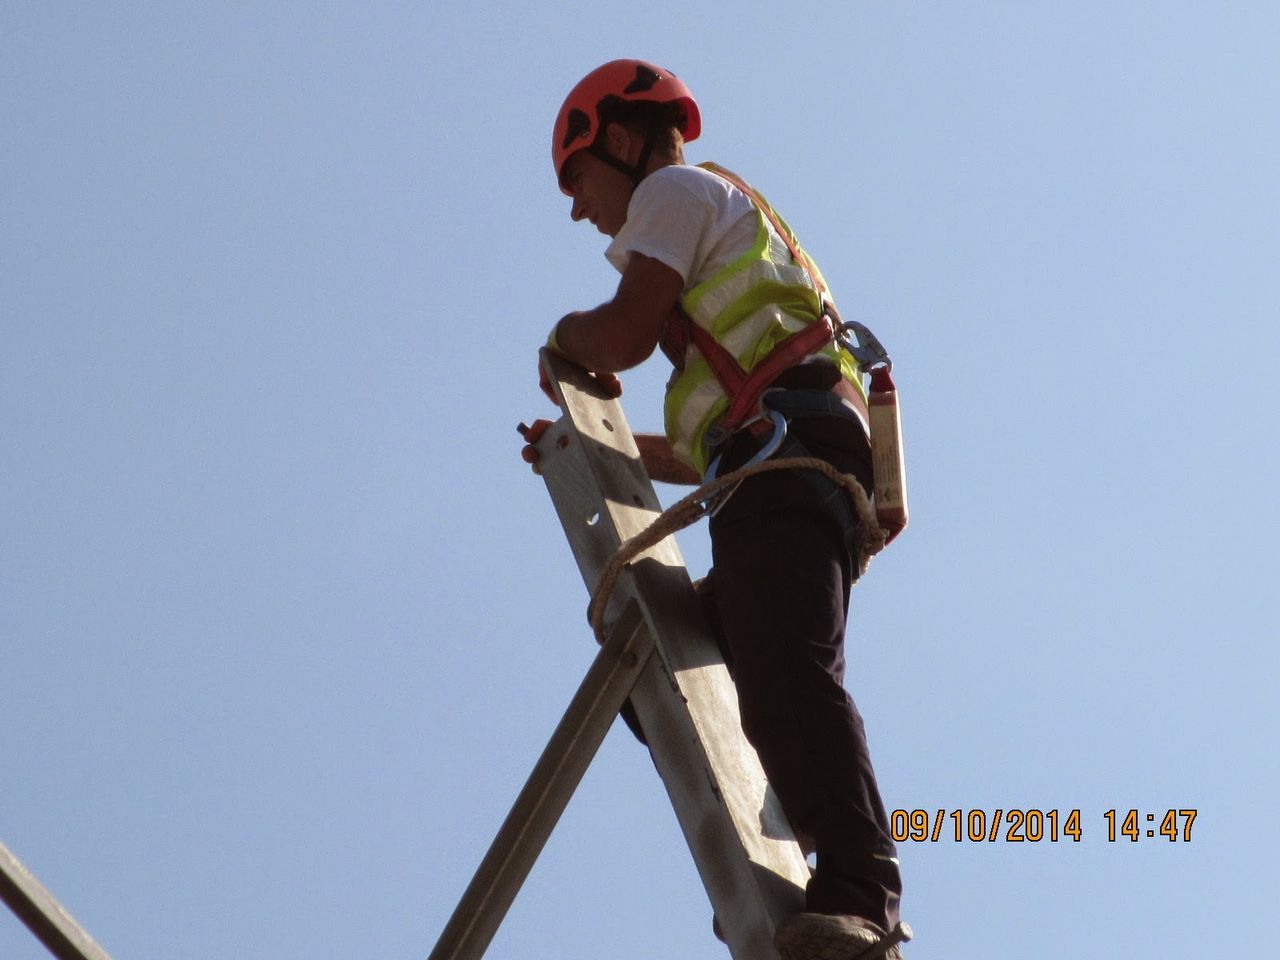 Worker on height health and safety transmission lines Transmission Line Tower Construction Site Helmet Clear Sky Working Men Protective Workwear Climbing Equipment Safety Harness Climbing